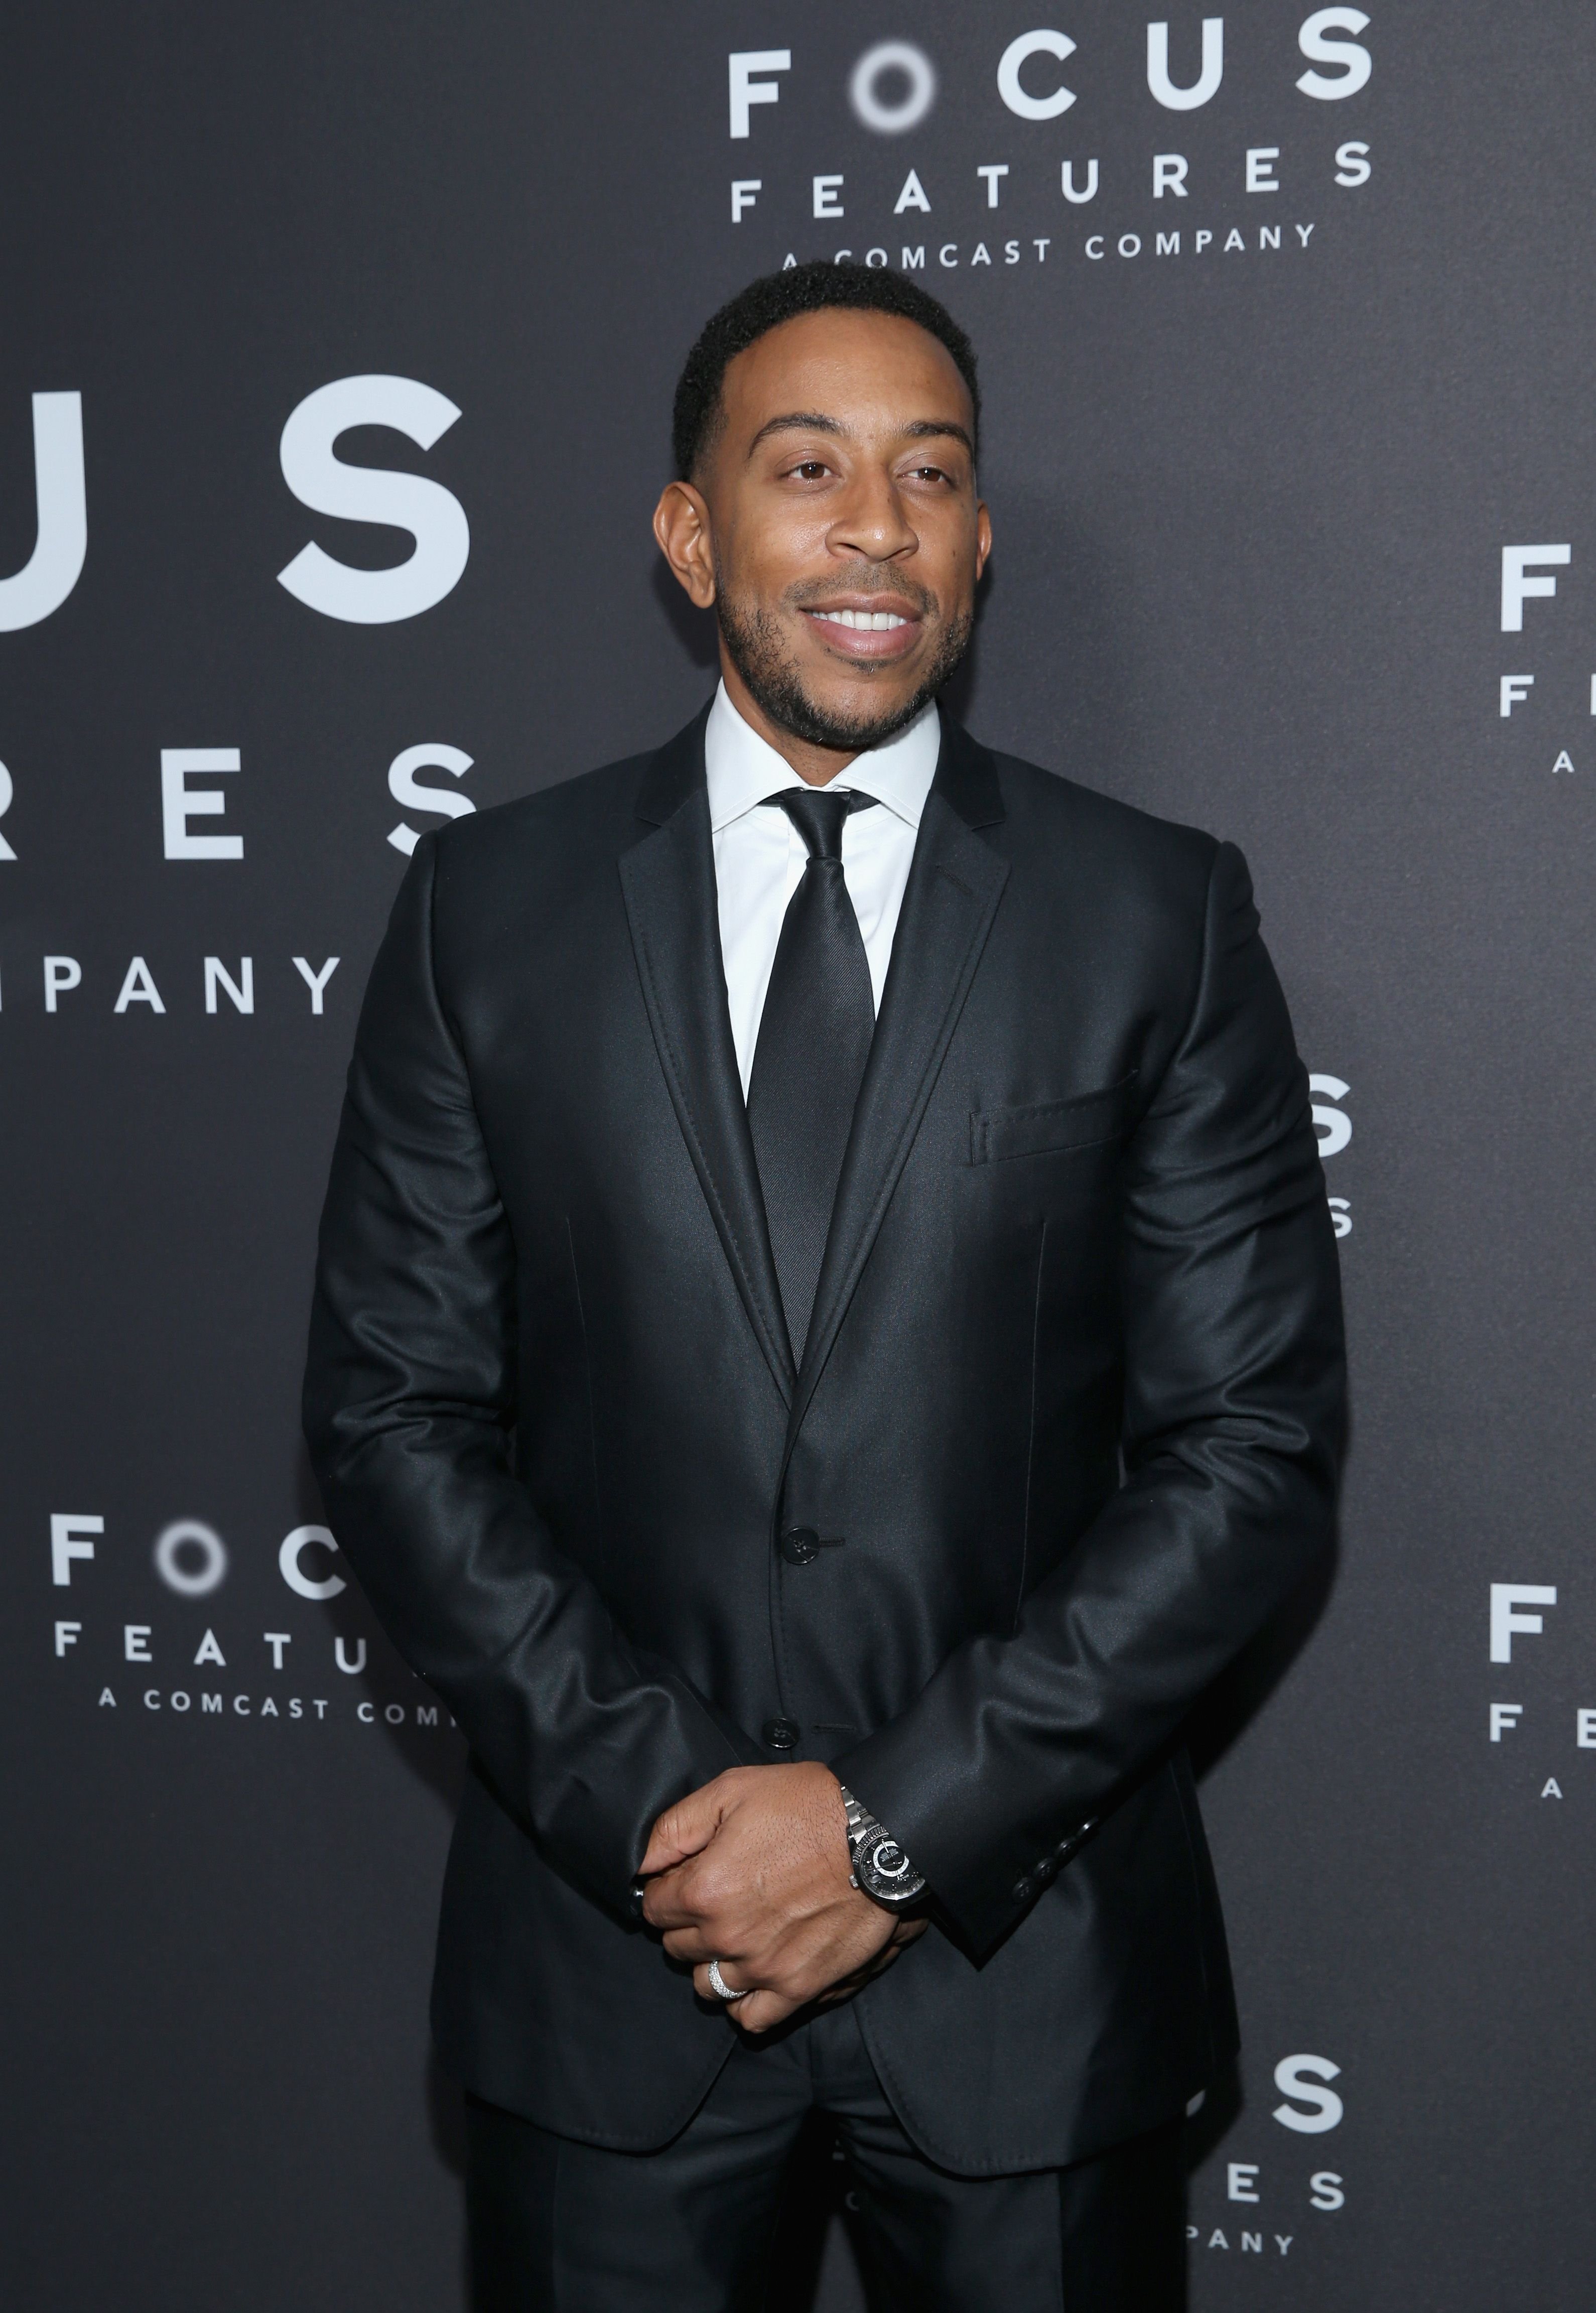 Ludacris at Focus Features' Golden Globe Awards after-party on January 7, 2018 | Photo: Getty Images